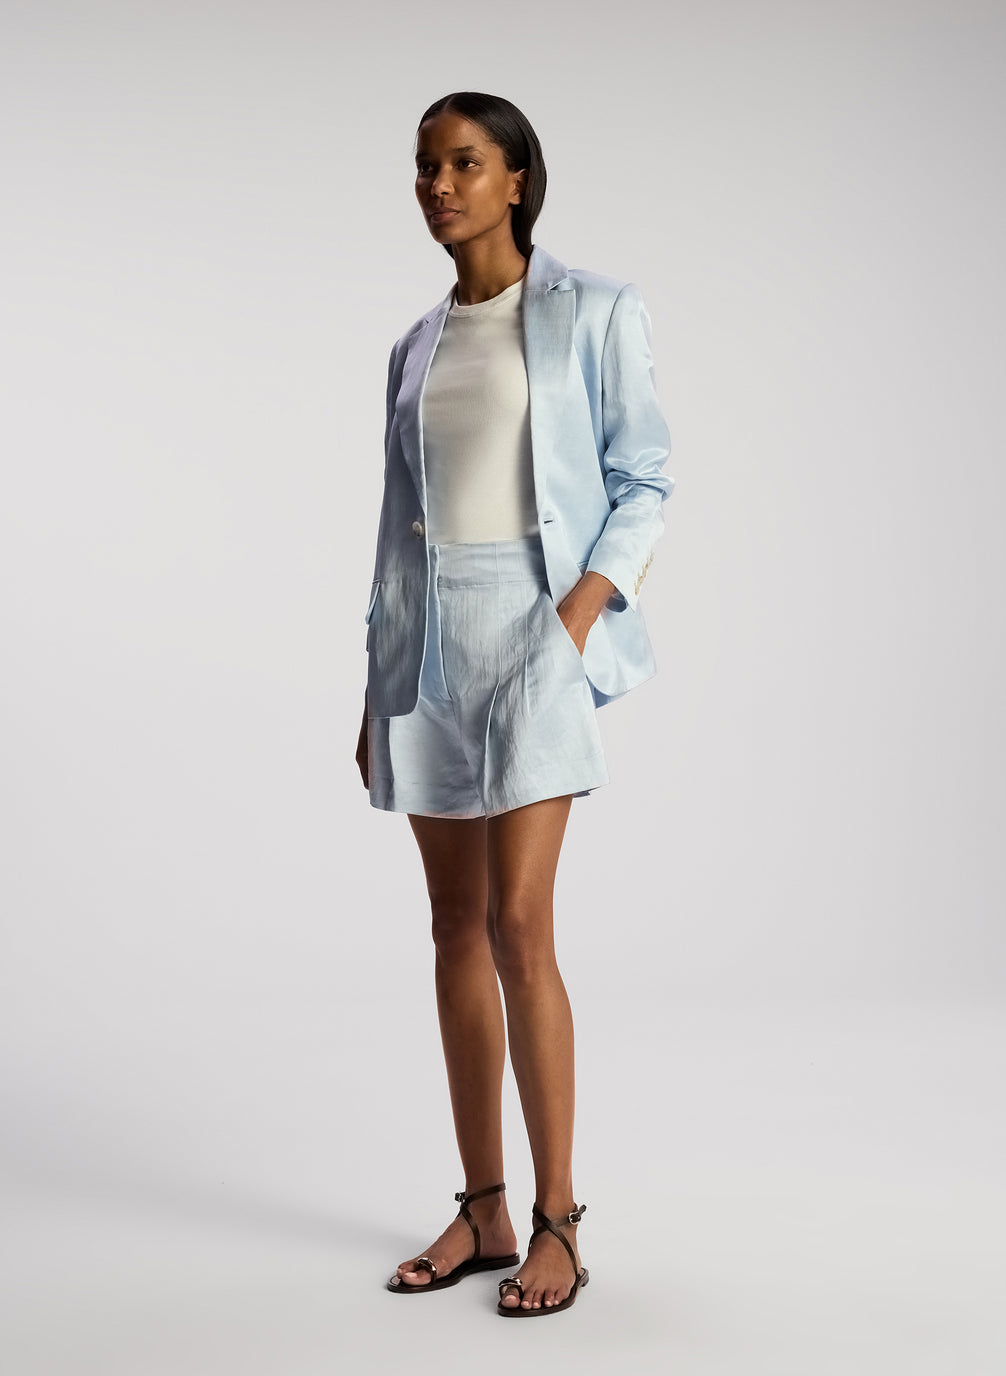 side view of woman wearing light blue blazer with matching shorts